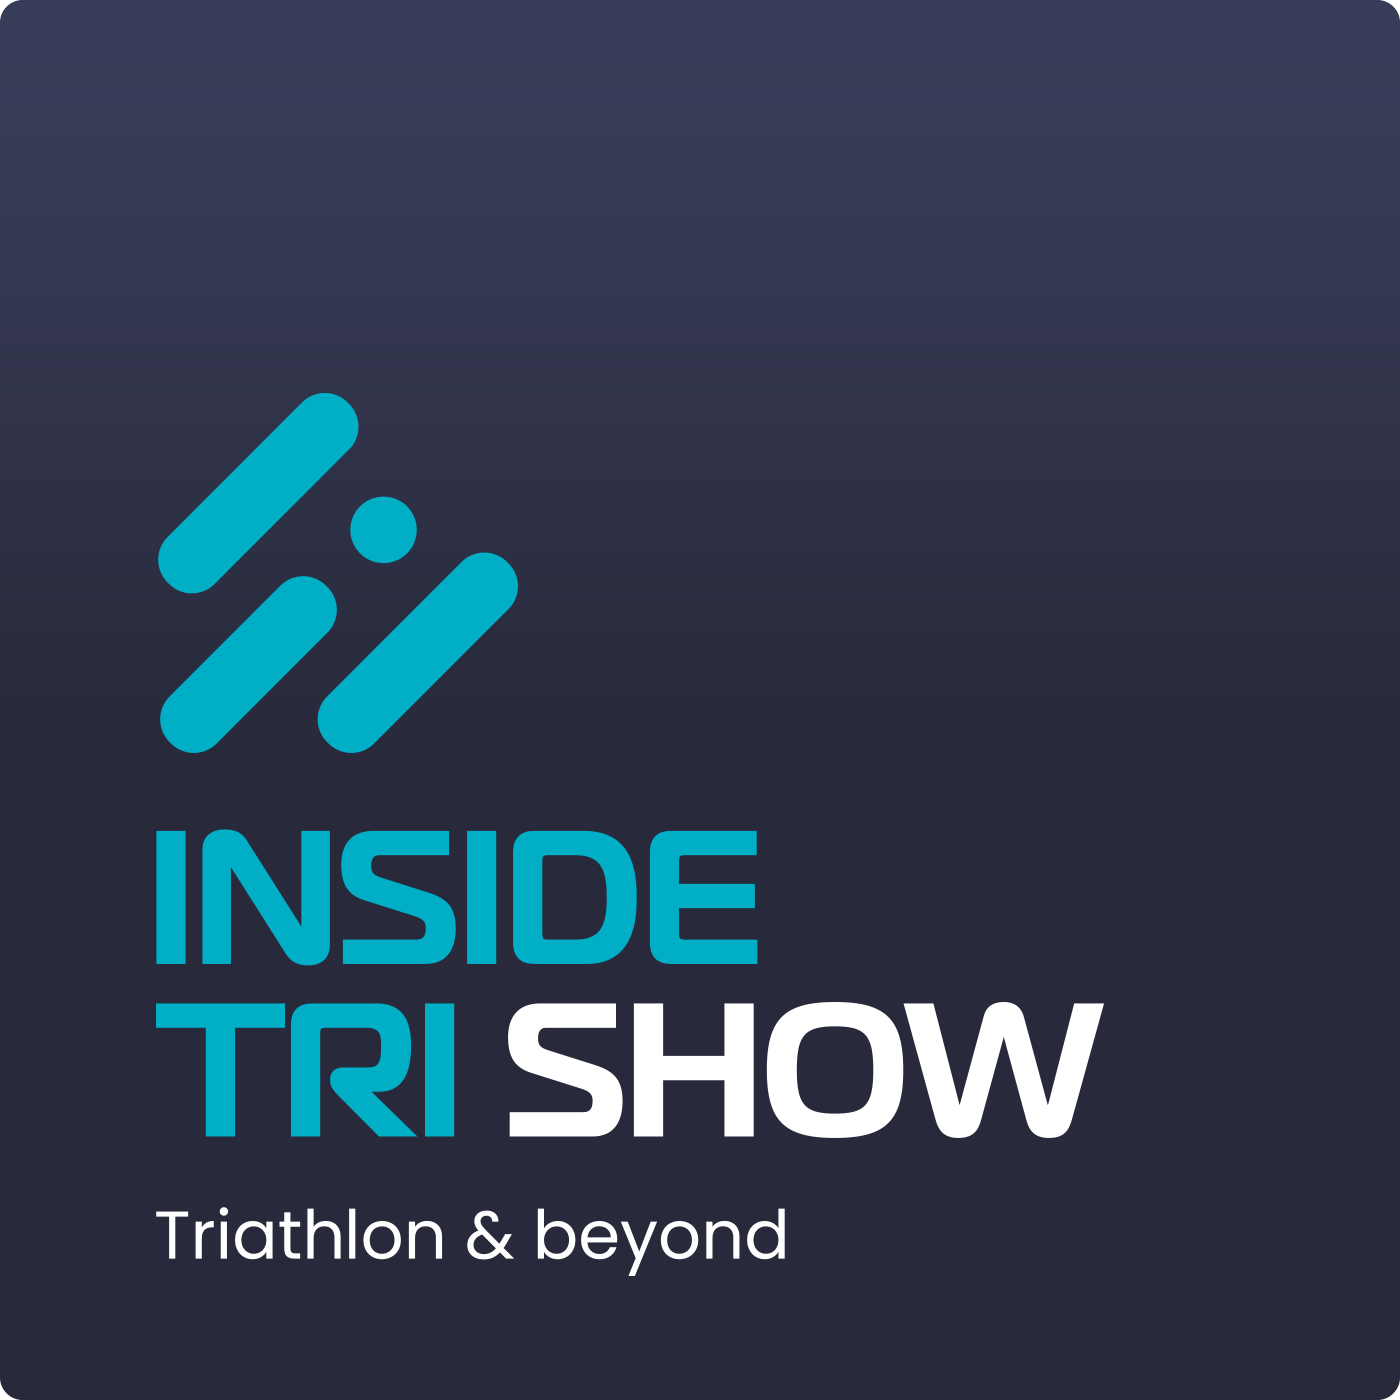 Joanna Patterson The Doctor on a triathlon mission Inside Tri Show